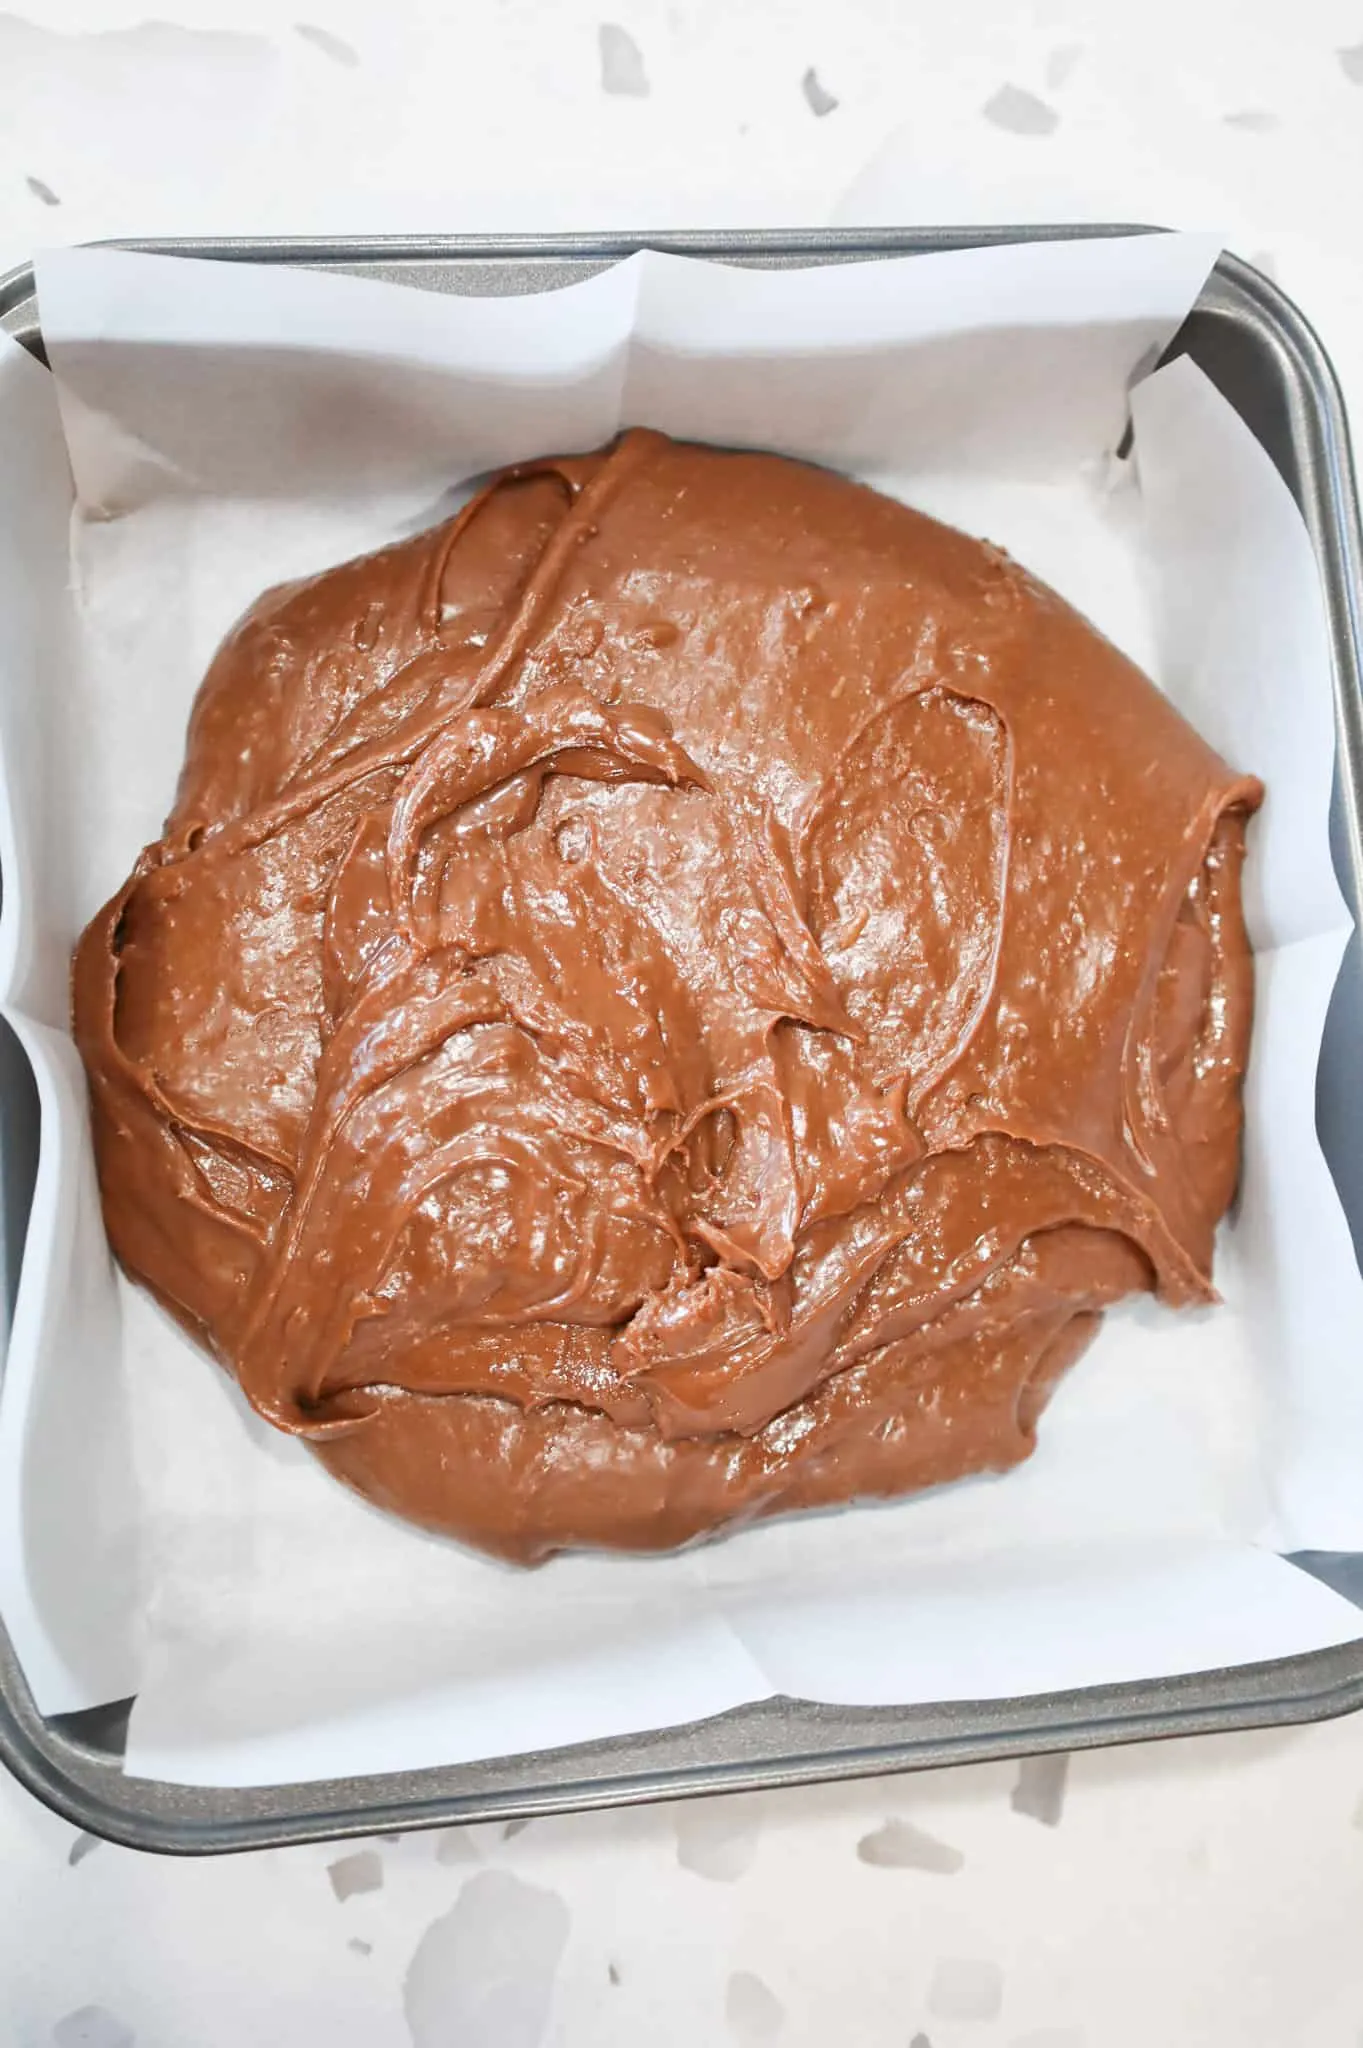 milk chocolate mixture in a parchment lined baking pan